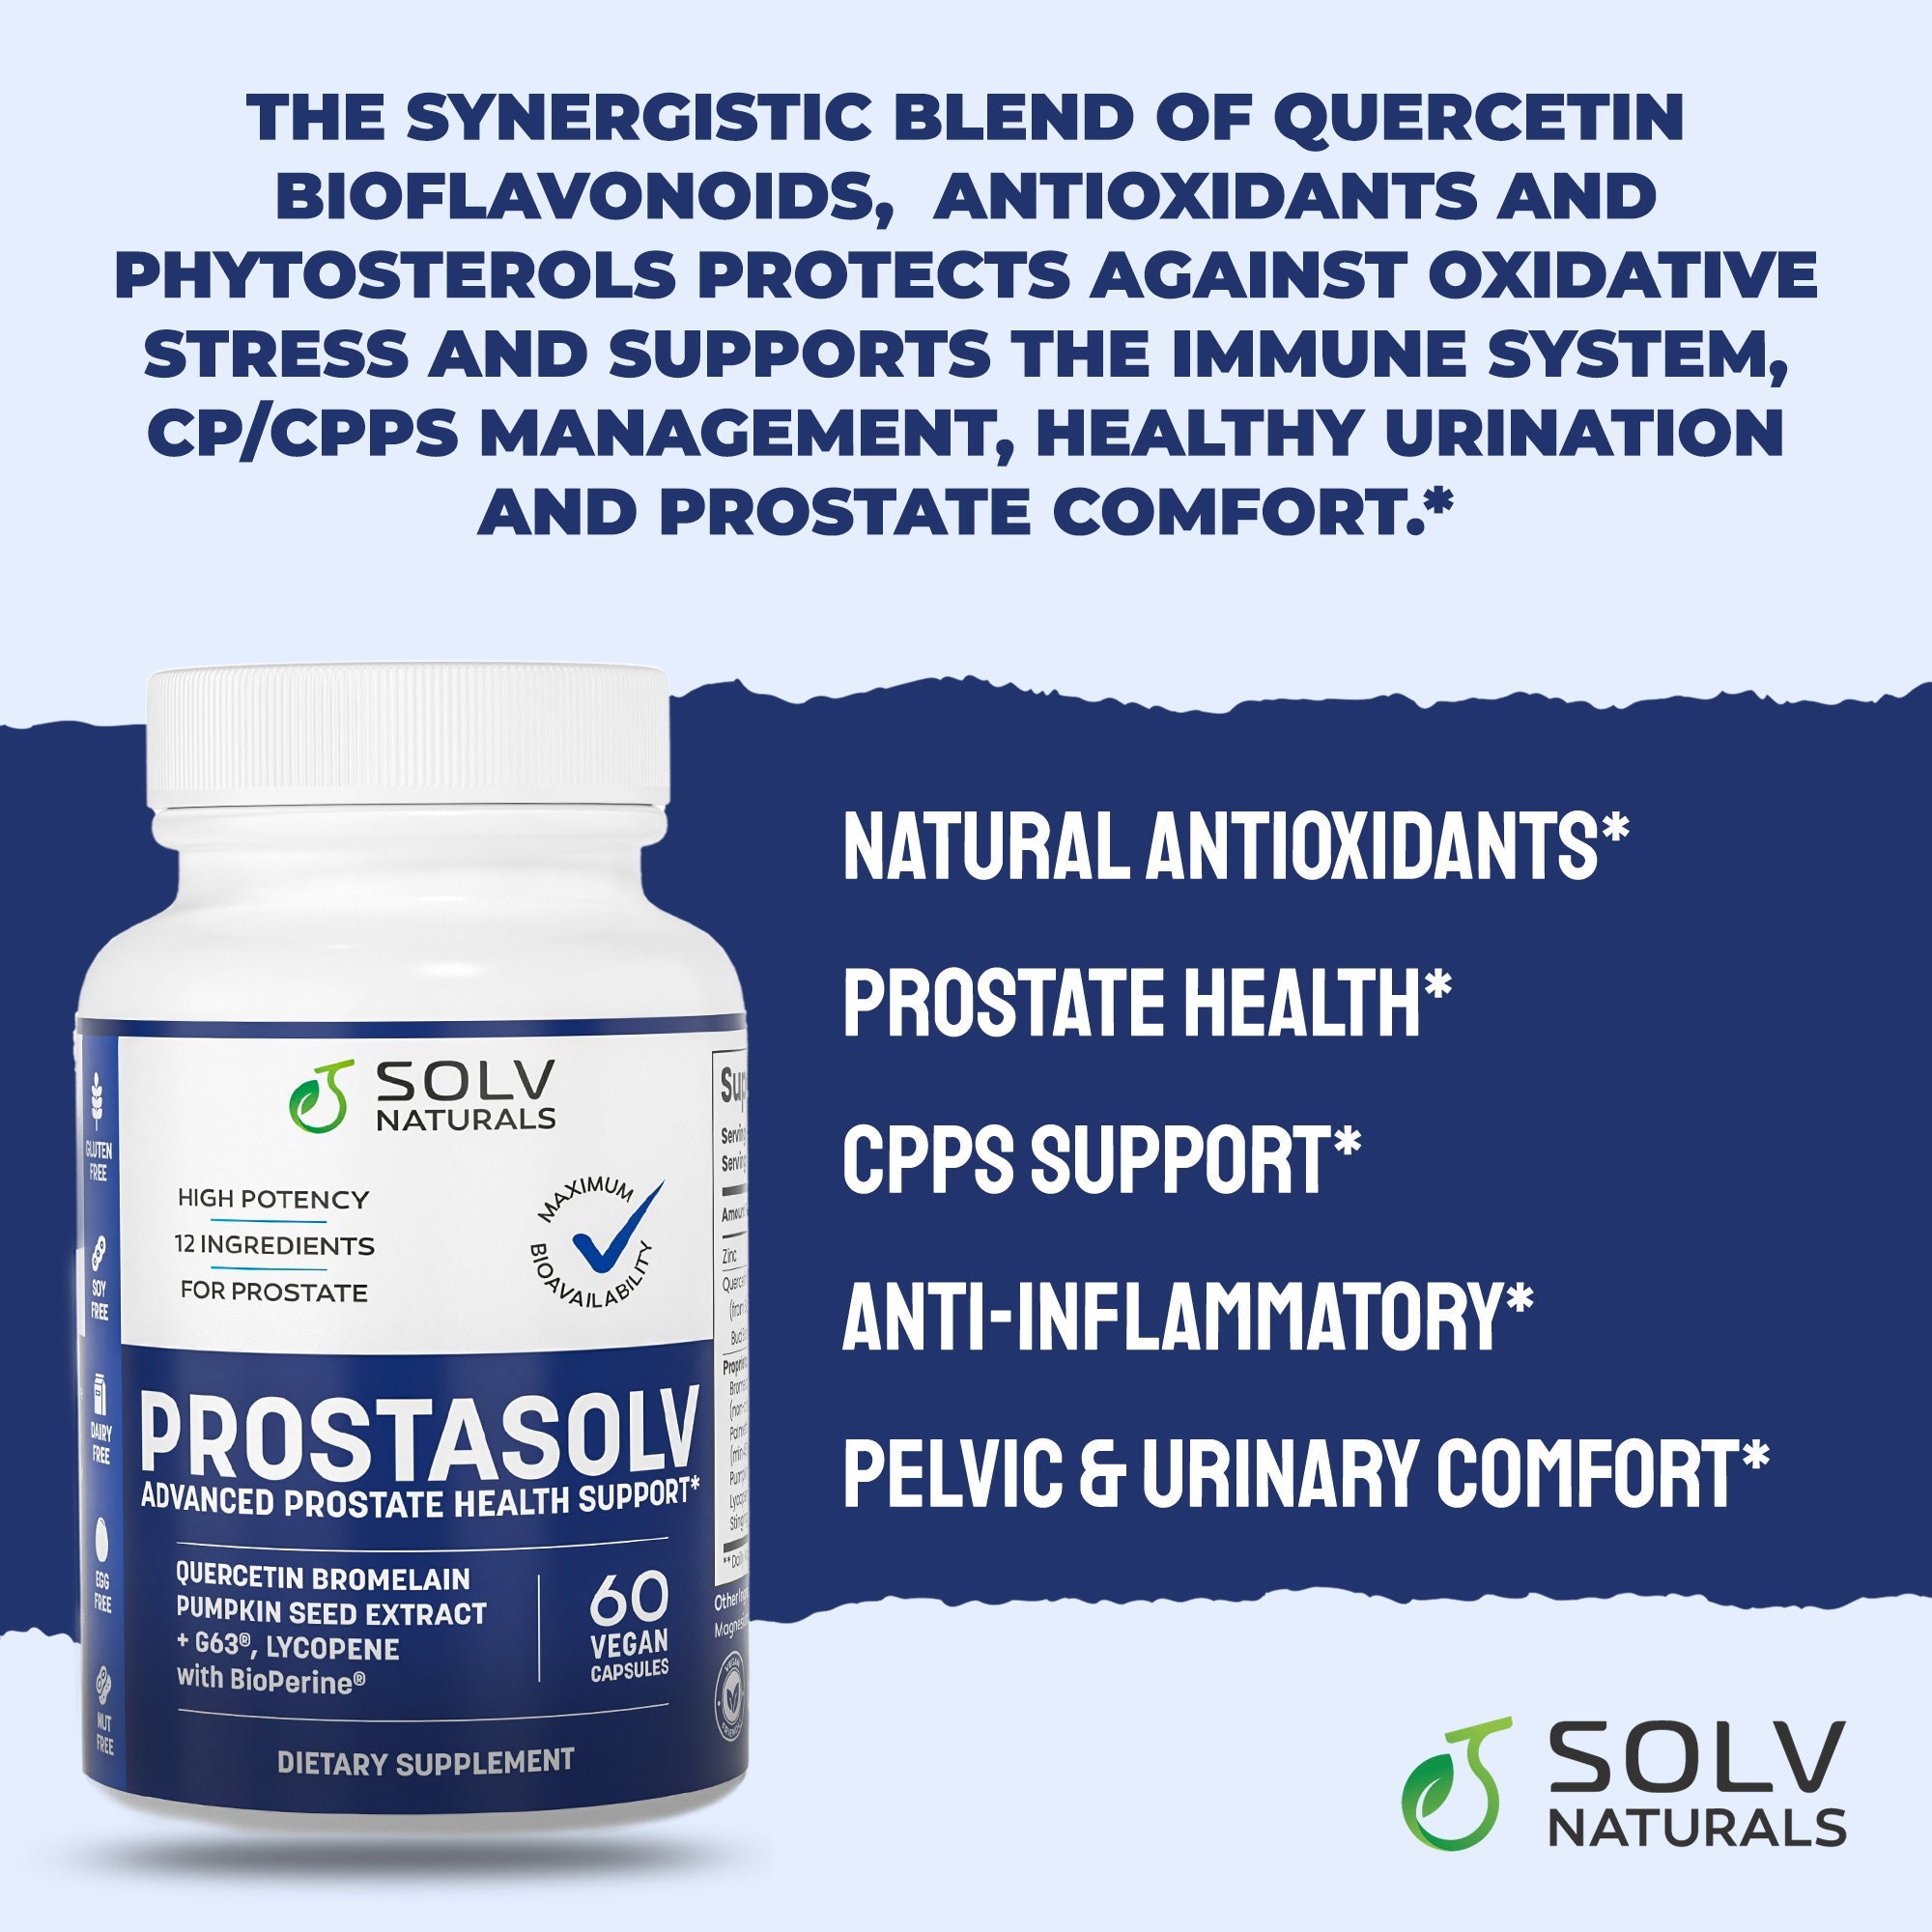 PROSTASOLV provides natural antioxidants and natural anti-inflammatory support for prostate health, cpps support, pelvic & urinary comfort.*